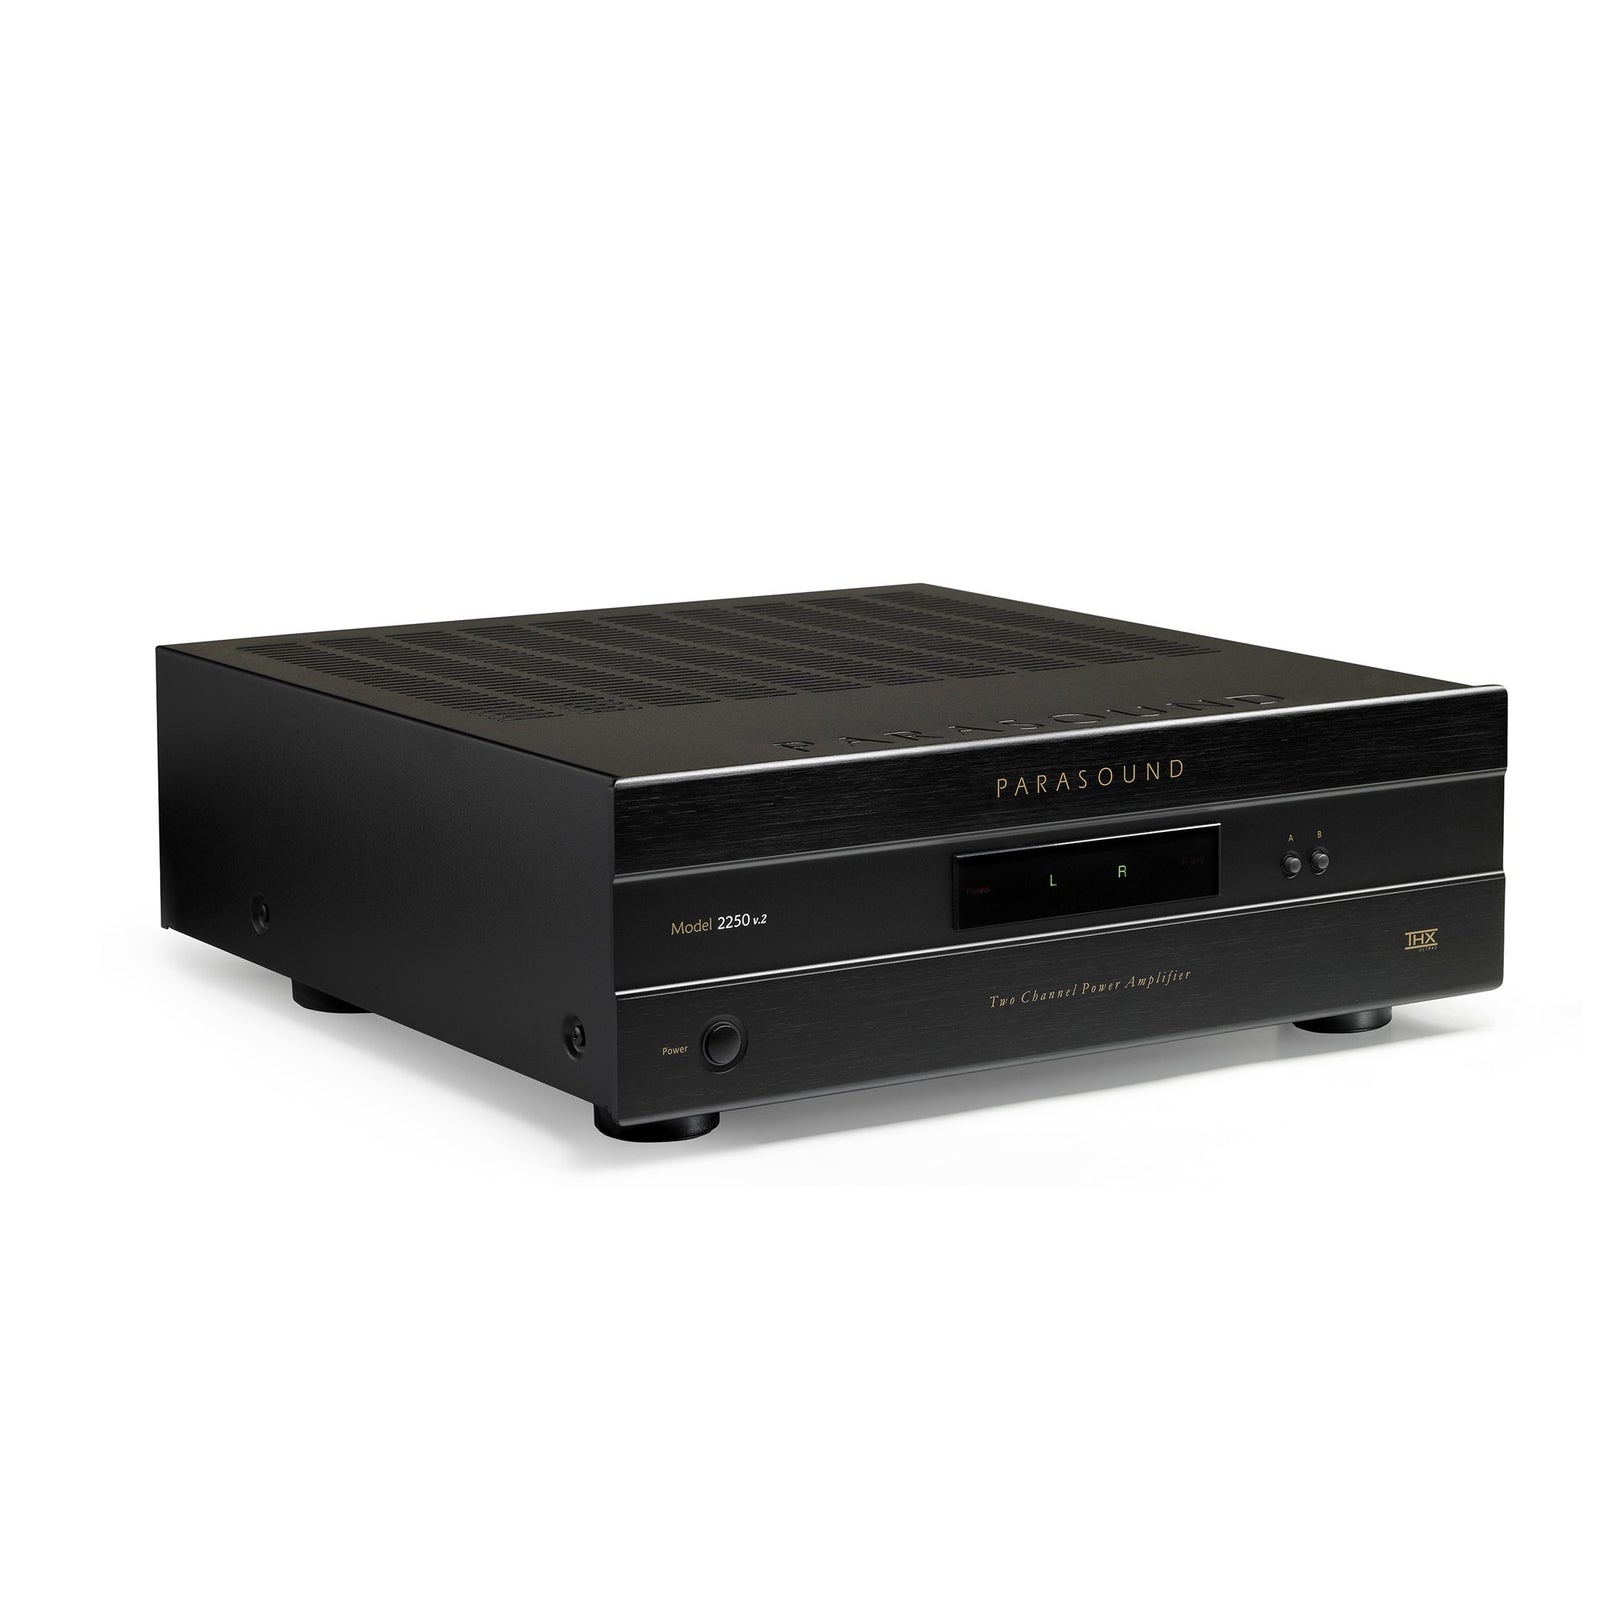 Parasound NewClassic 2250 v.2 Two Channel Power Amplifier - With a great sound into stunning packages, find all Parasound model Halo P 6 - Model Halo JC 5 - A51 - A52+ - JC 2 BP - Zpre3, A 21+ Stereo Power Amplifier, Amplifier, Mono Power Amplifier, Phono Preamplifier, Integrated Amplifier & DAC, Speaker Amplifier and more available at Vinyl Sound. We have mastered the art of assembling audio systems capable of reproducing music so perfectly, providing you with emotional experiences and satisfaction